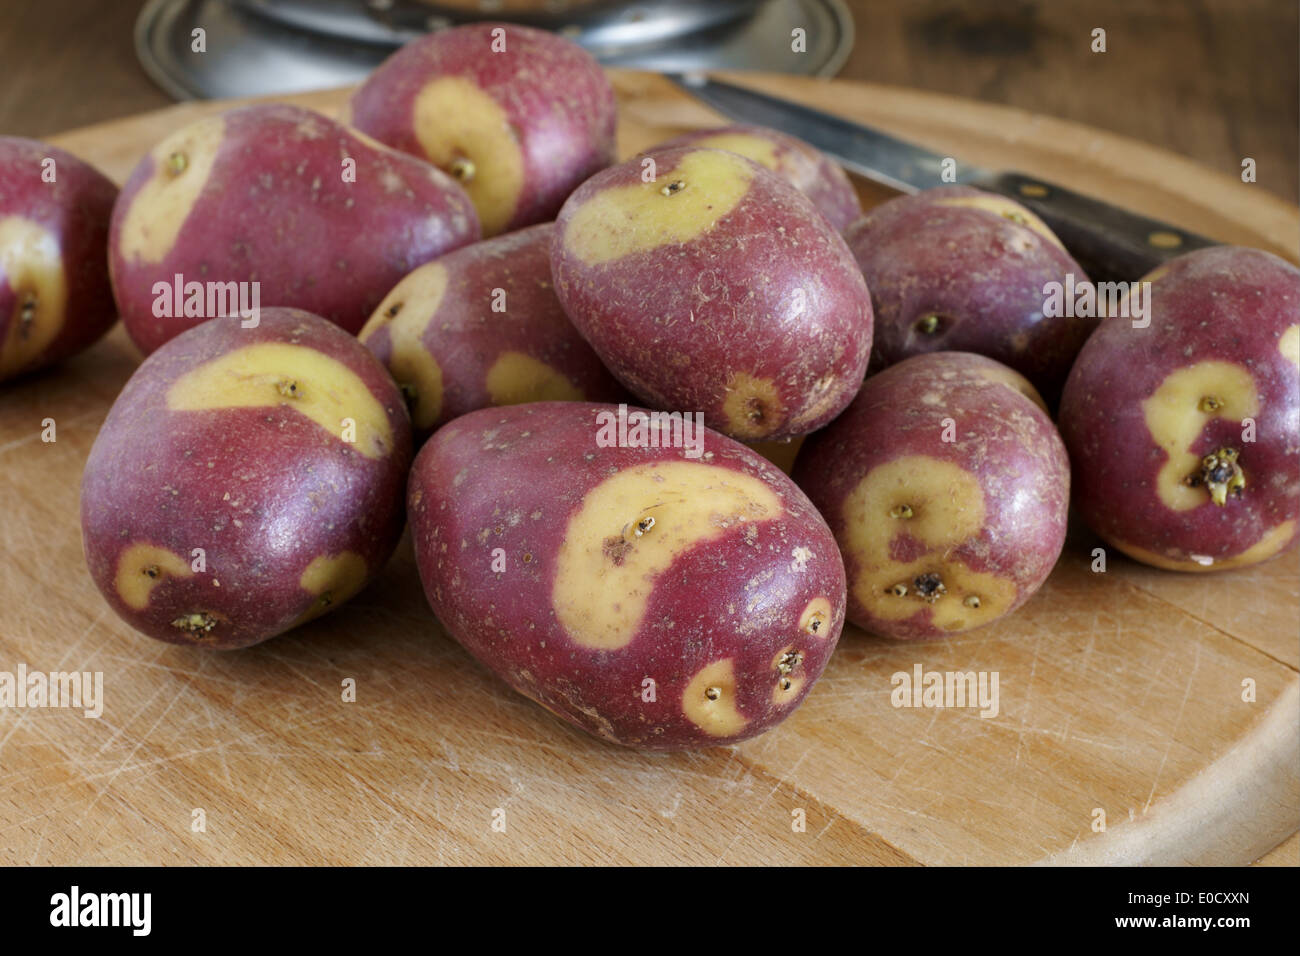 Apache Potatoes an unusual variety with red skins and creamy white patches good for roasting or boiling Stock Photo